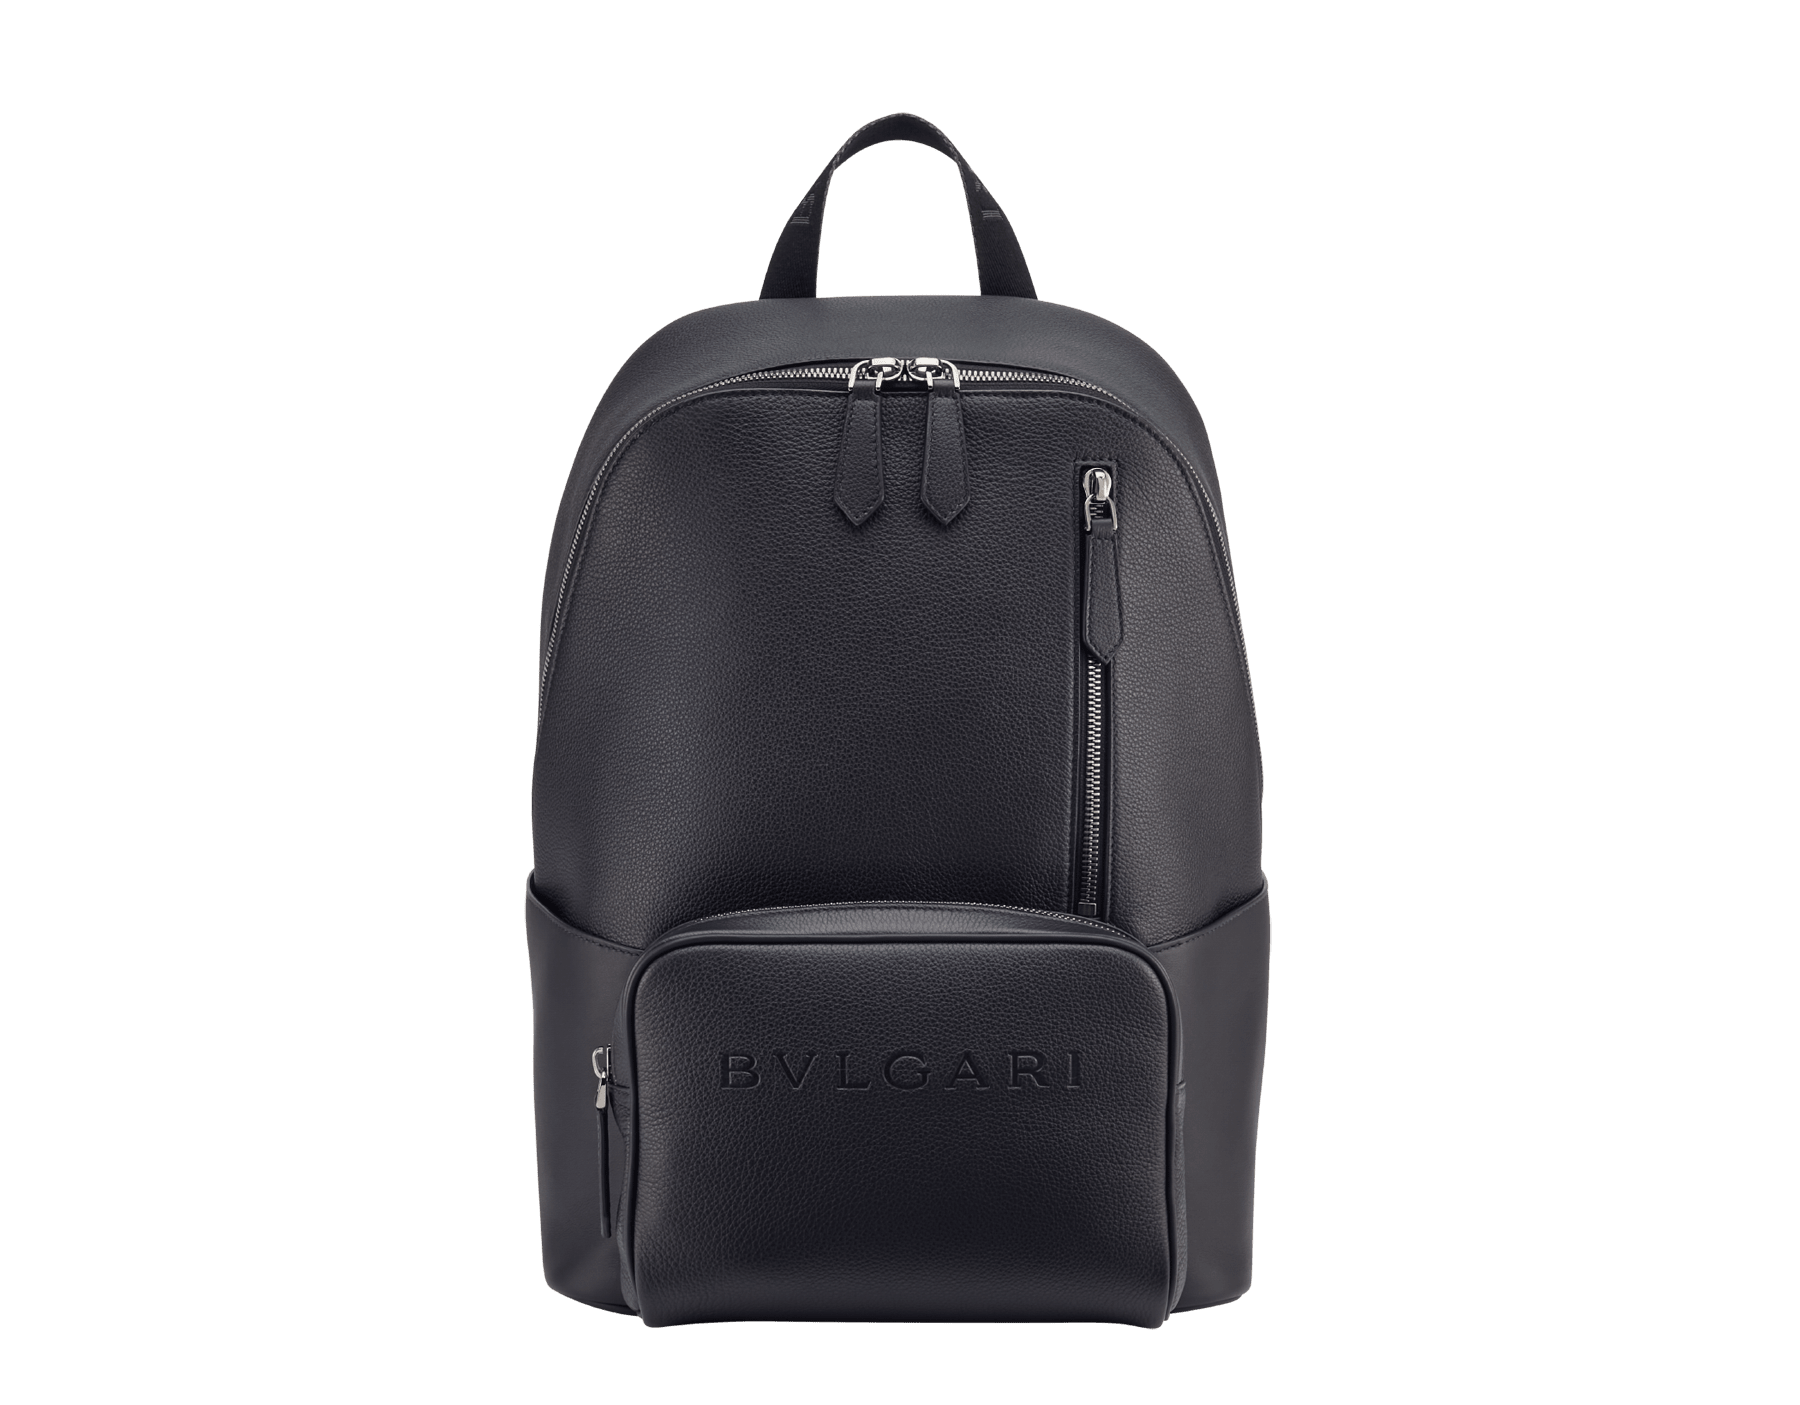 BULGARI Man large backpack in black smooth and grainy metal-free calf leather with Olympian sapphire blue regenerated nylon (ECONYL®) lining. Dark ruthenium-plated brass hardware, hot stamped BULGARI logo and zipped closure. 291922 image 1